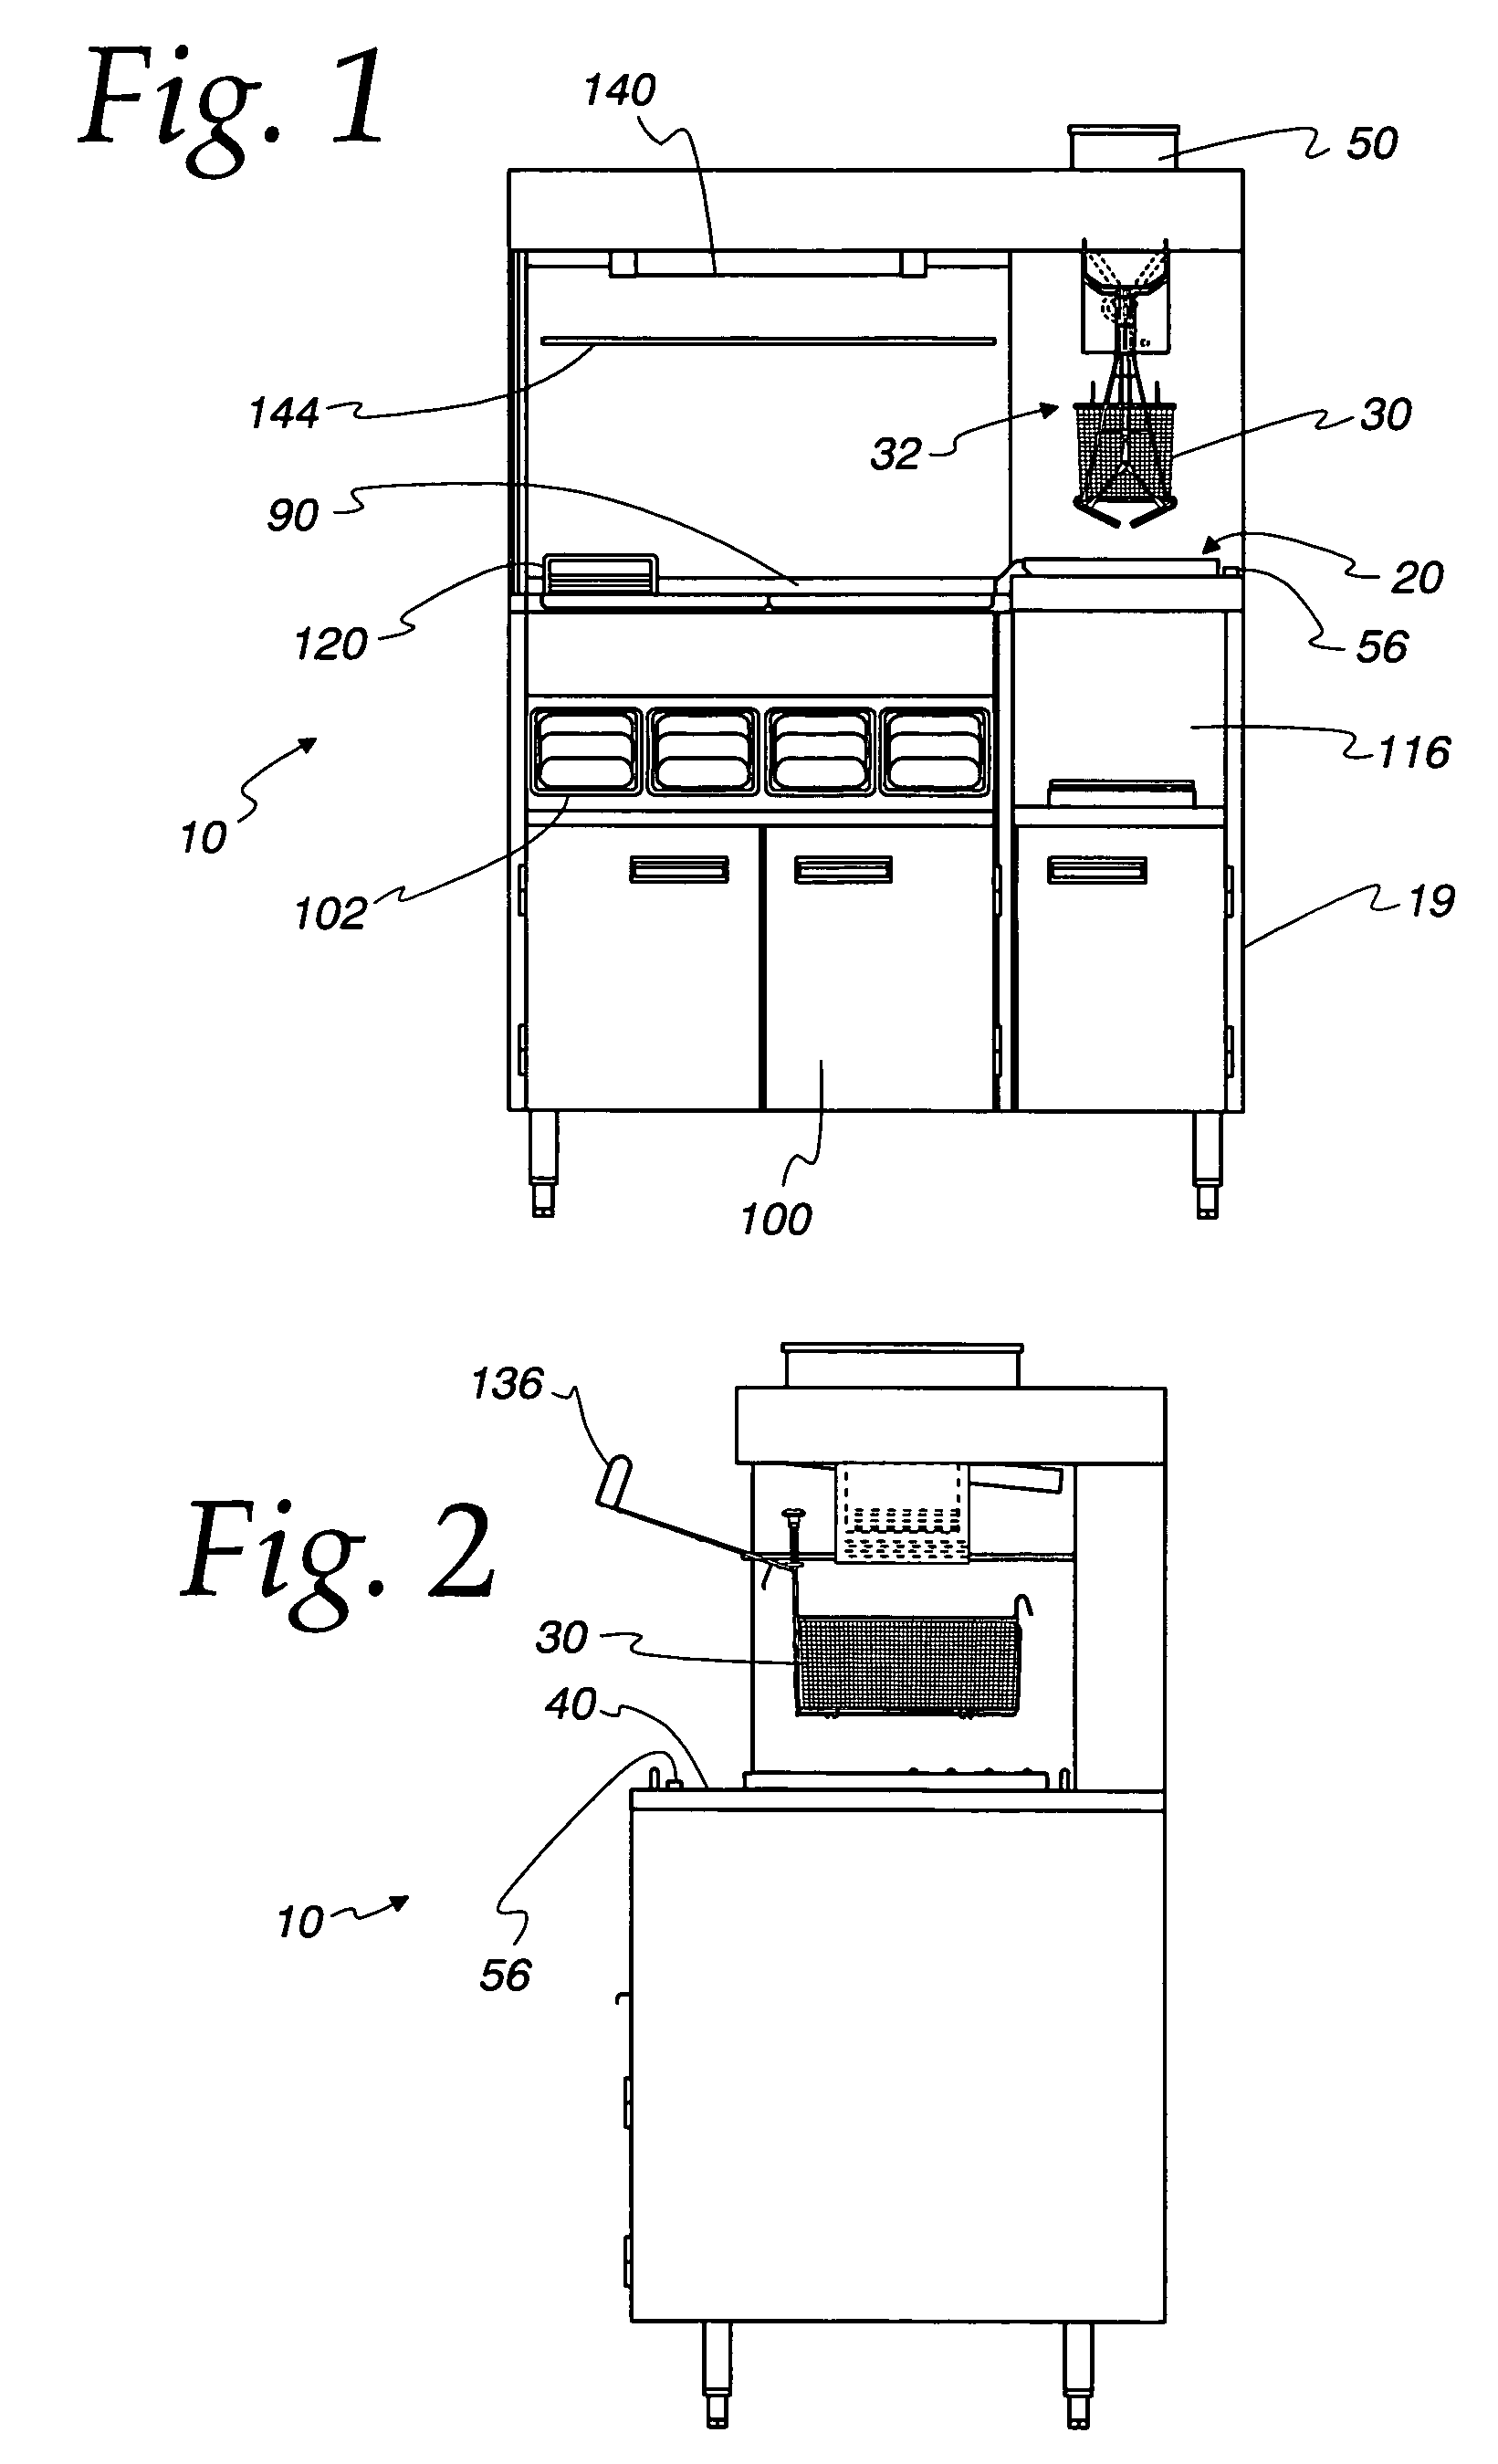 Storage and packaging of bulk food items and method